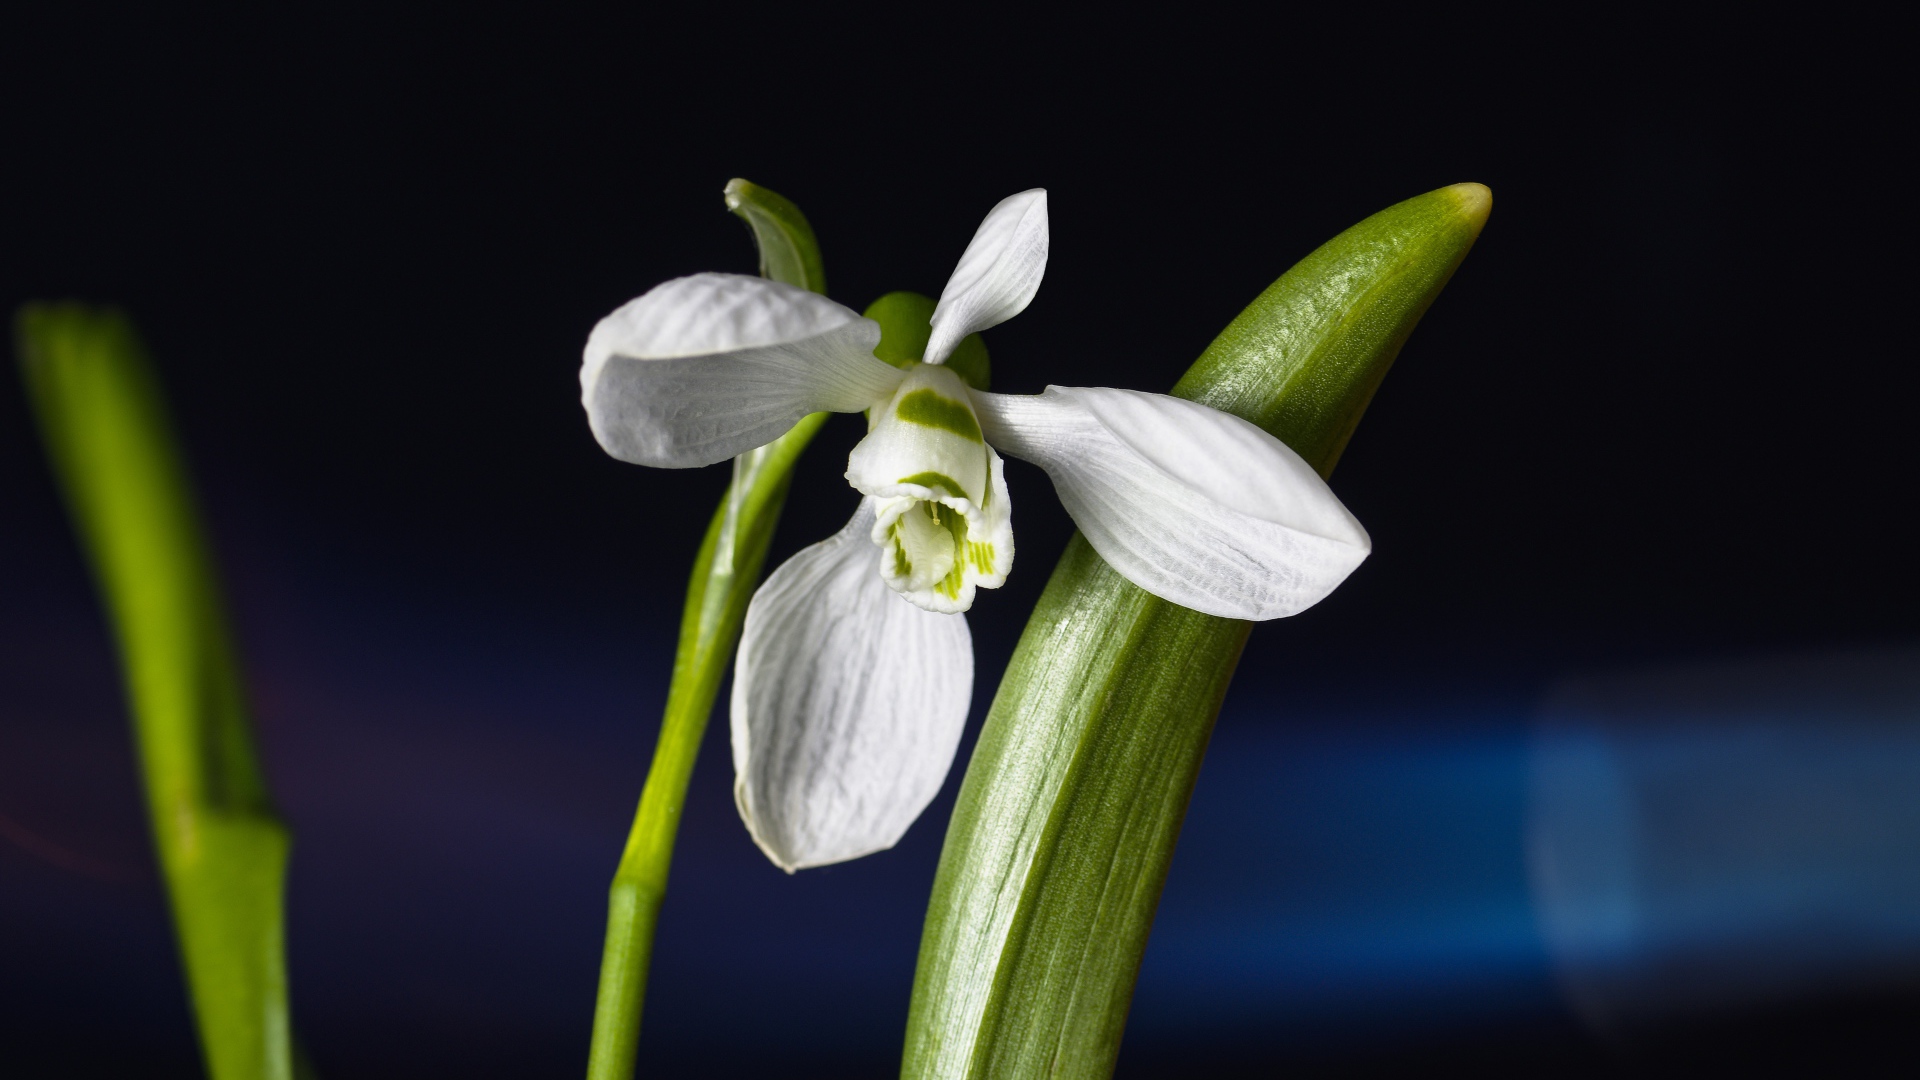 Delicate white snowdrop flower with green leaves